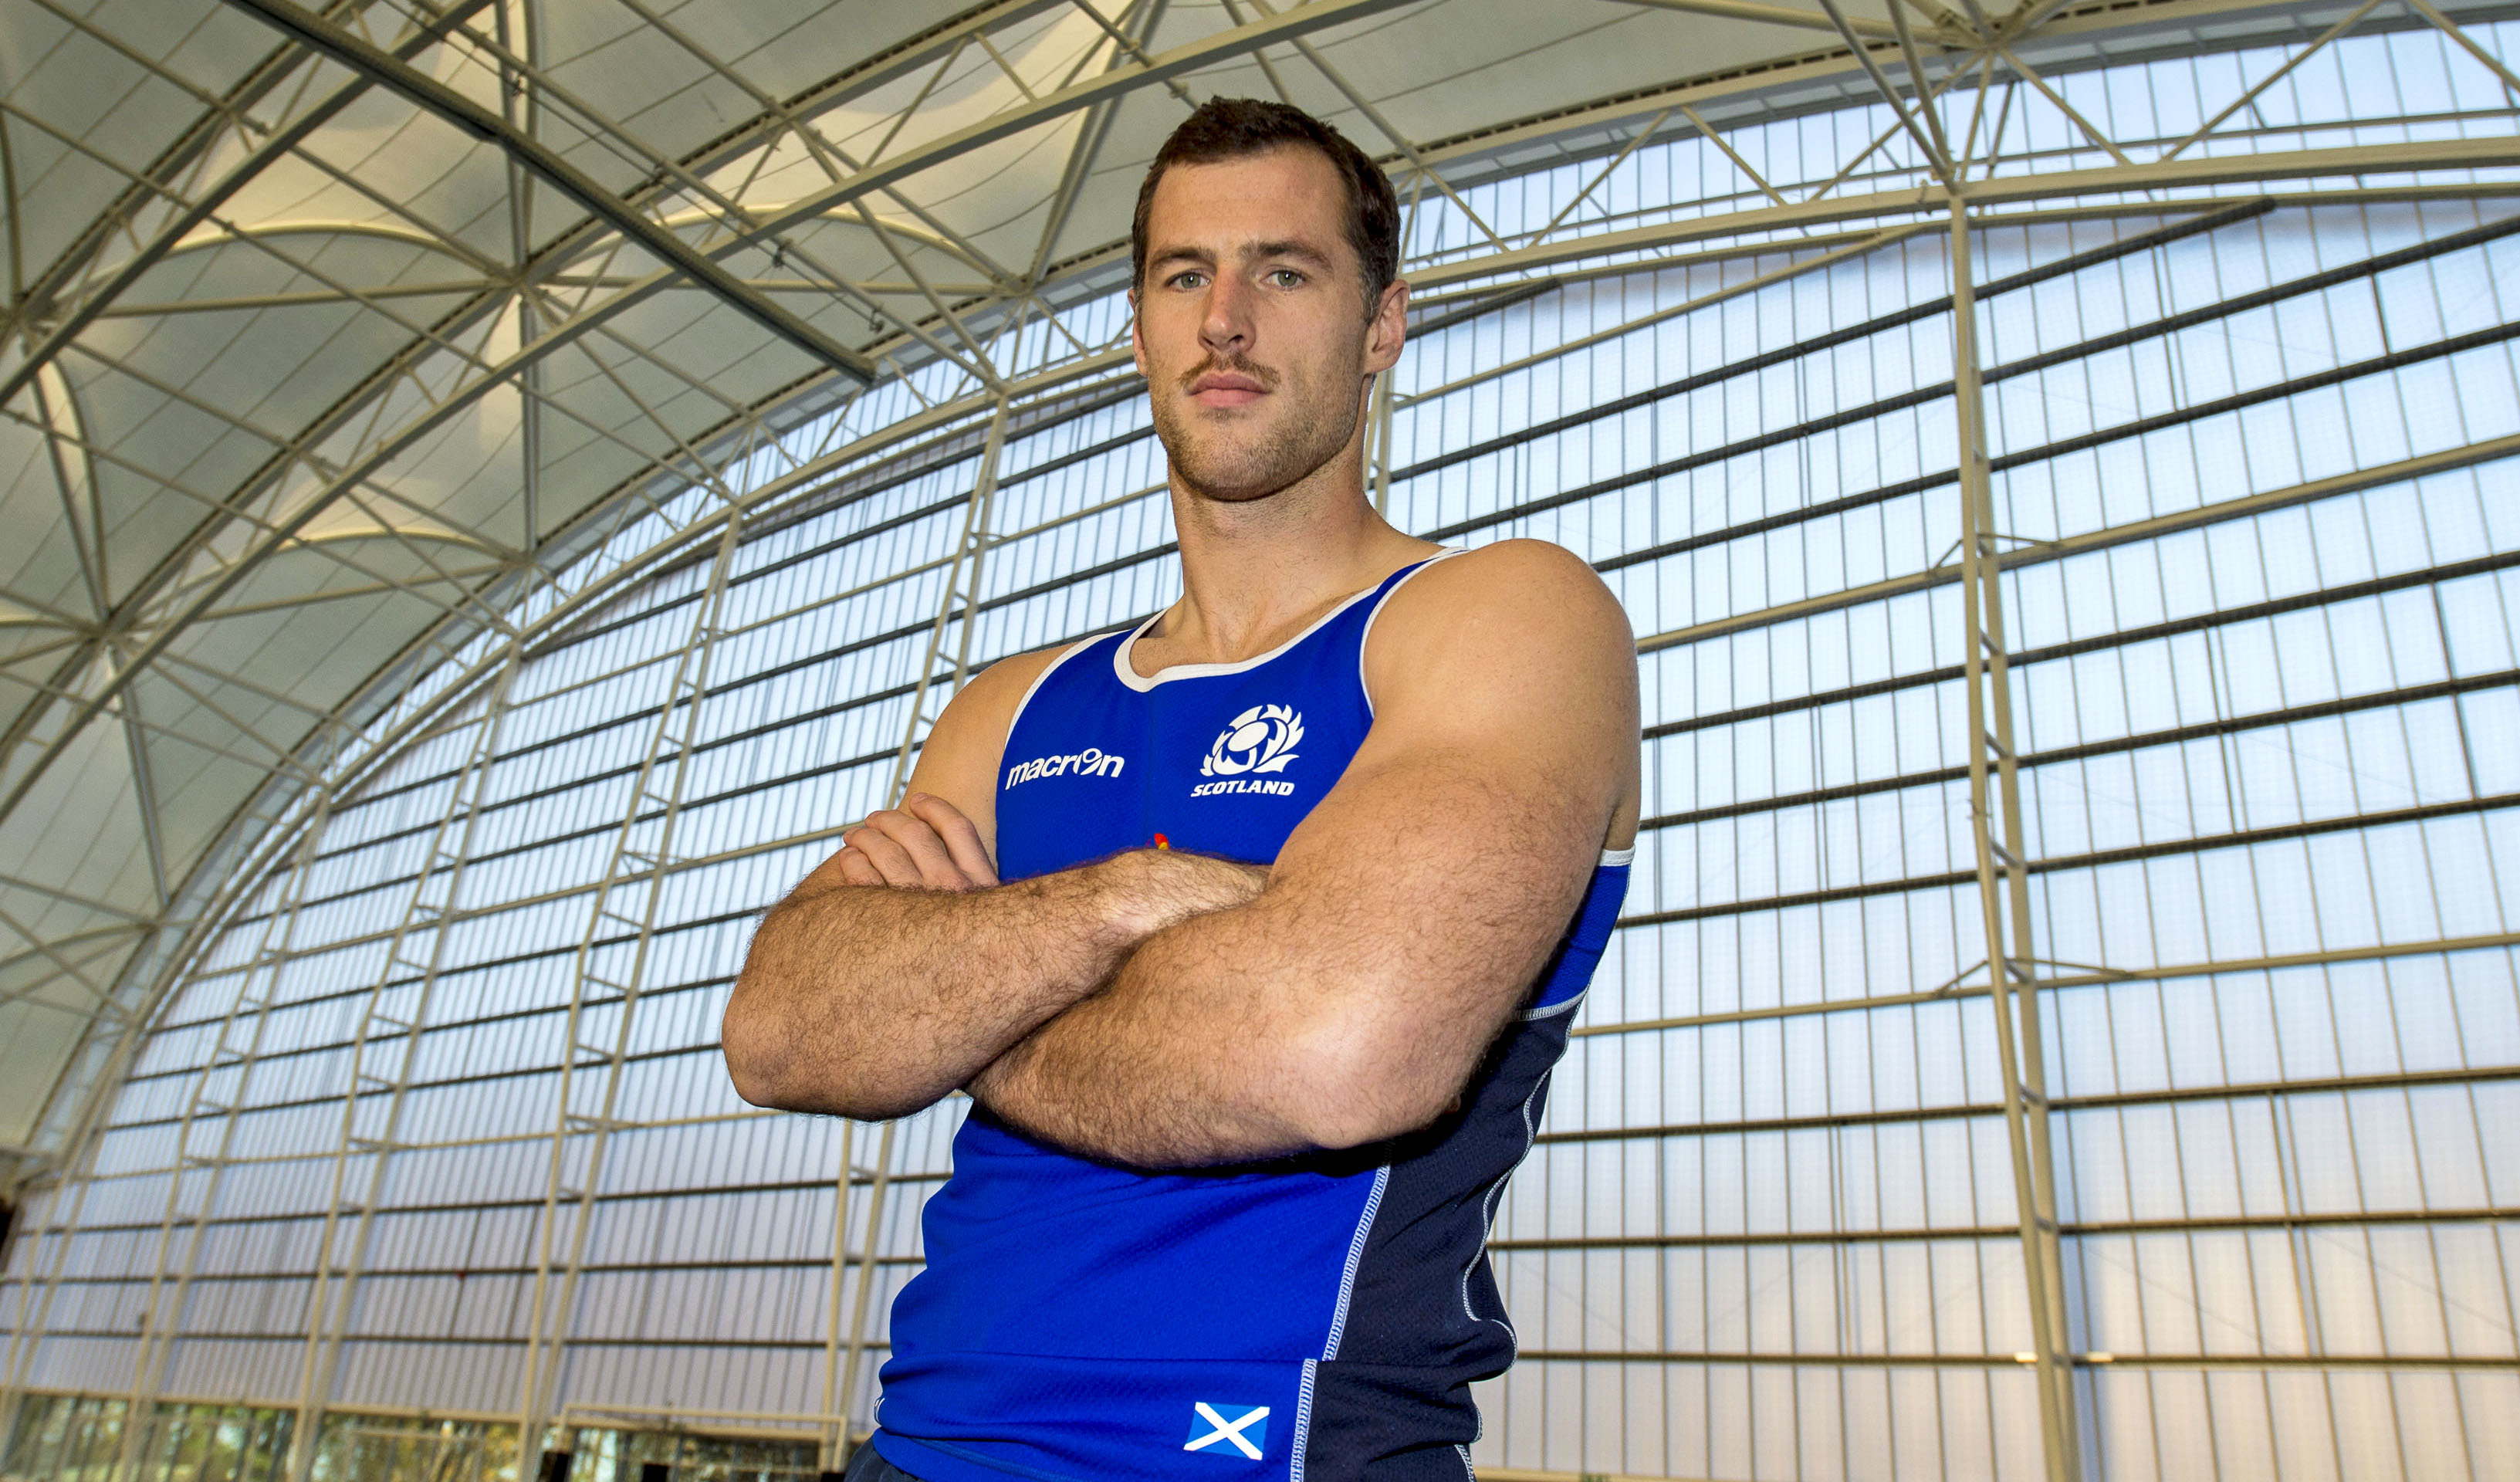 Tim Visser is back scoring tries and looking to continue against Argentina.